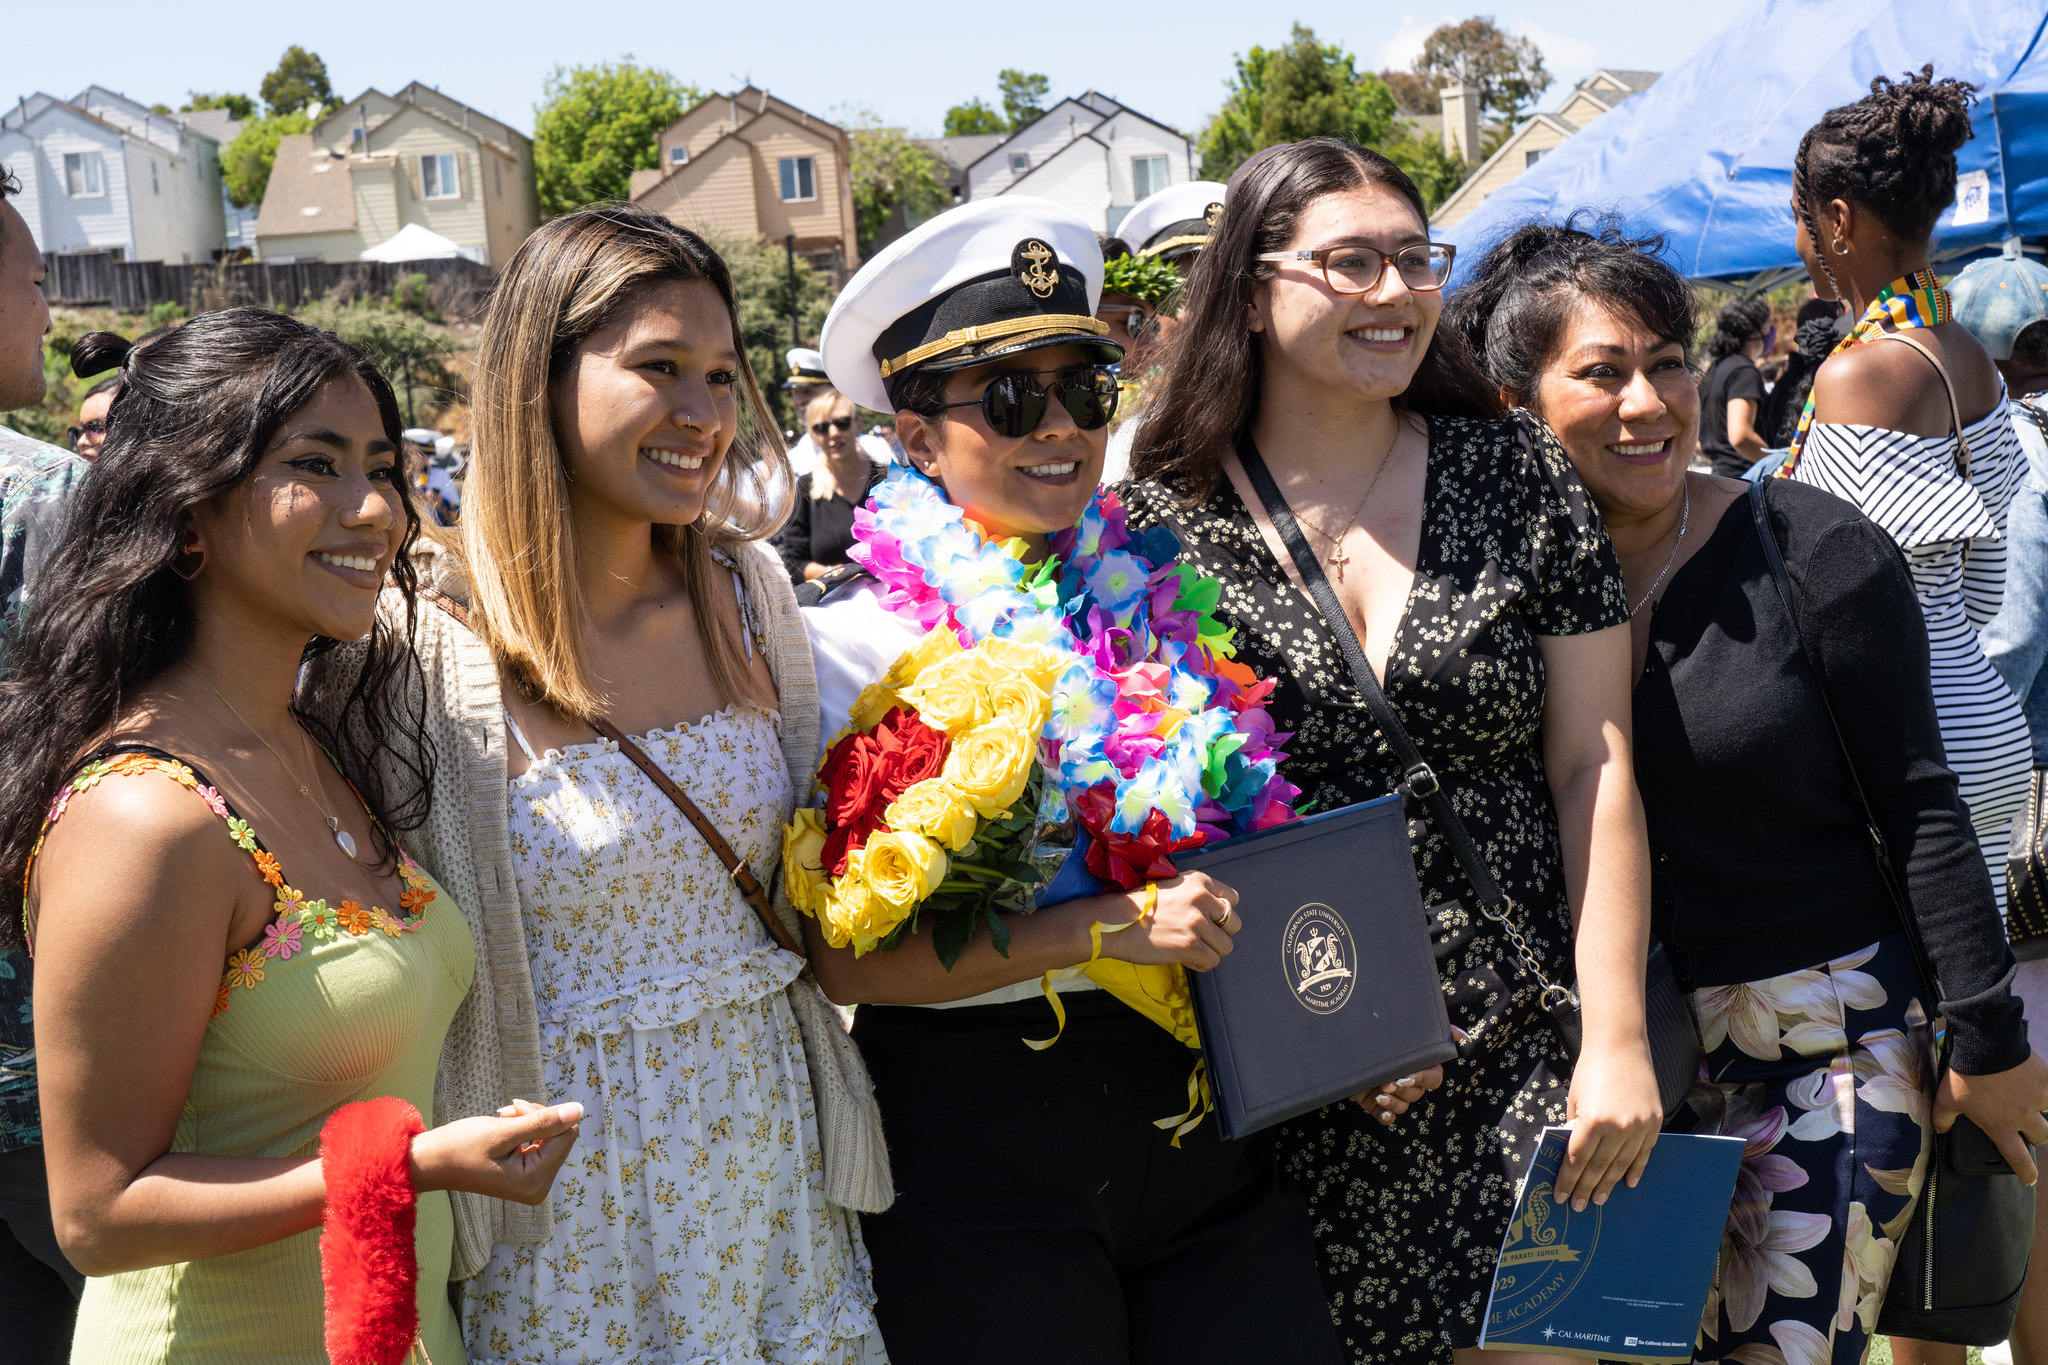 According to Nasdaq, California State University Maritime Academy is among the Top 10 Best Colleges in California to attend. Read more.